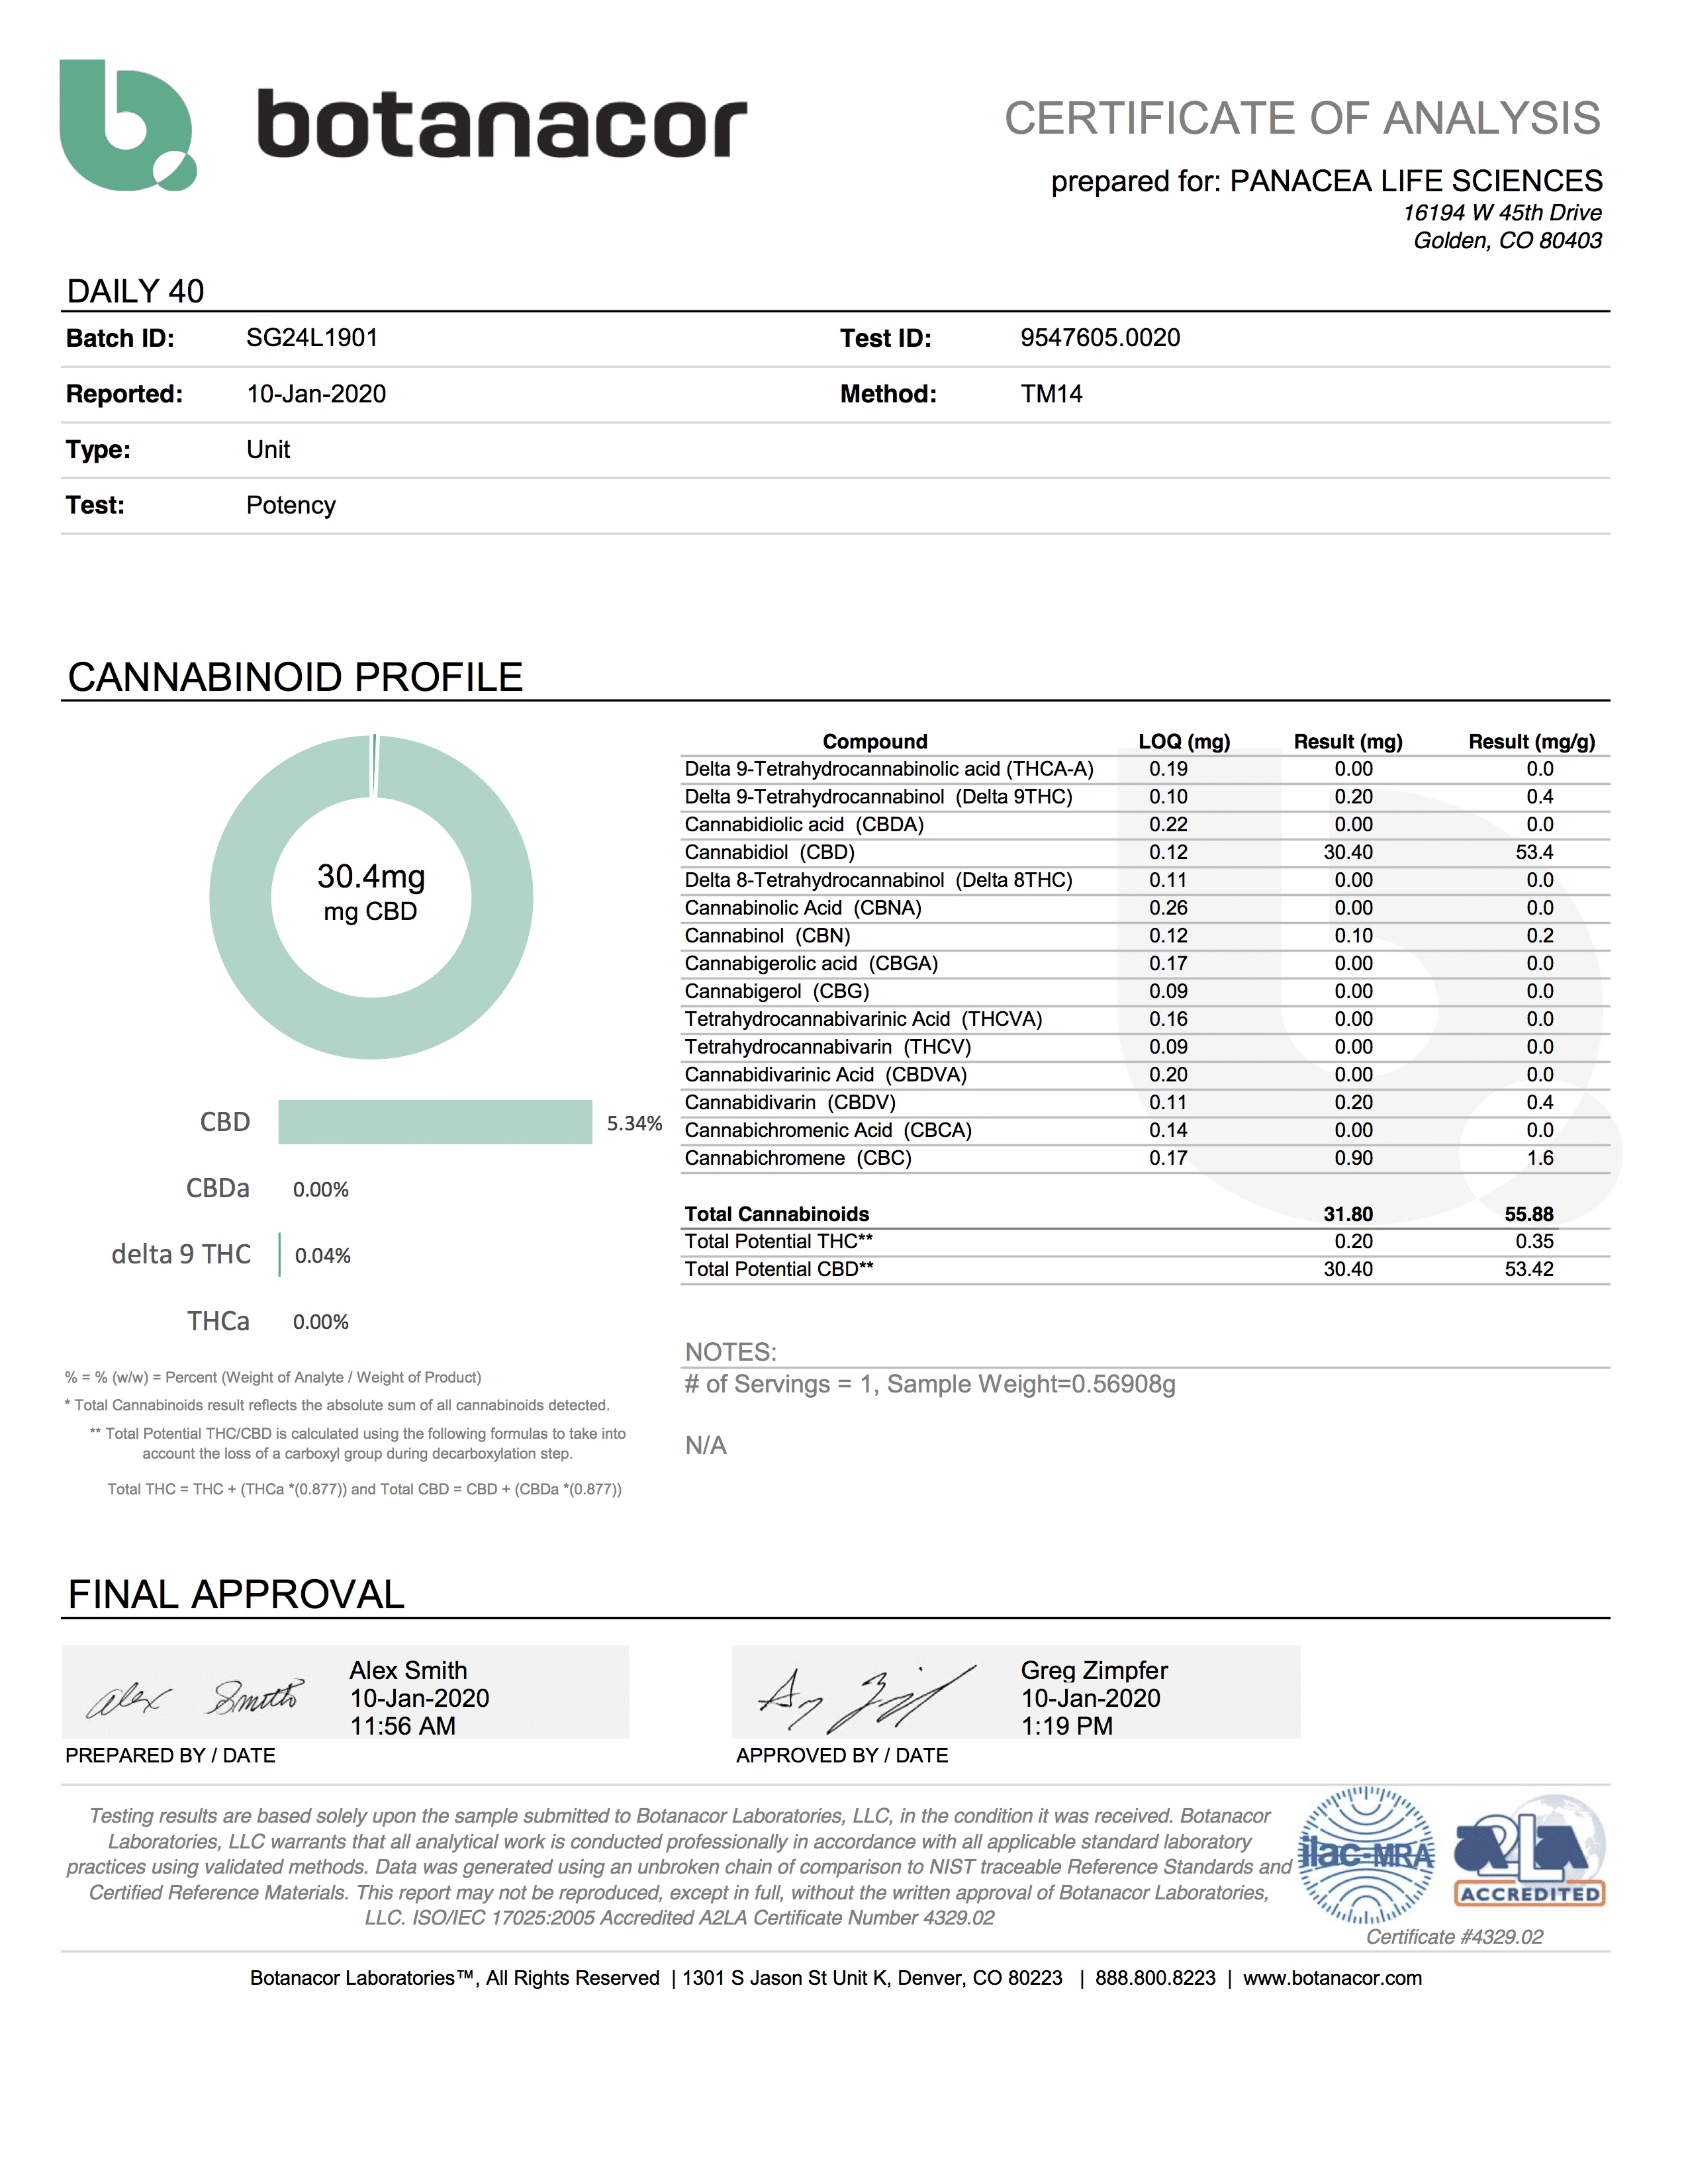 Panacea Test Results - Daily 40mg